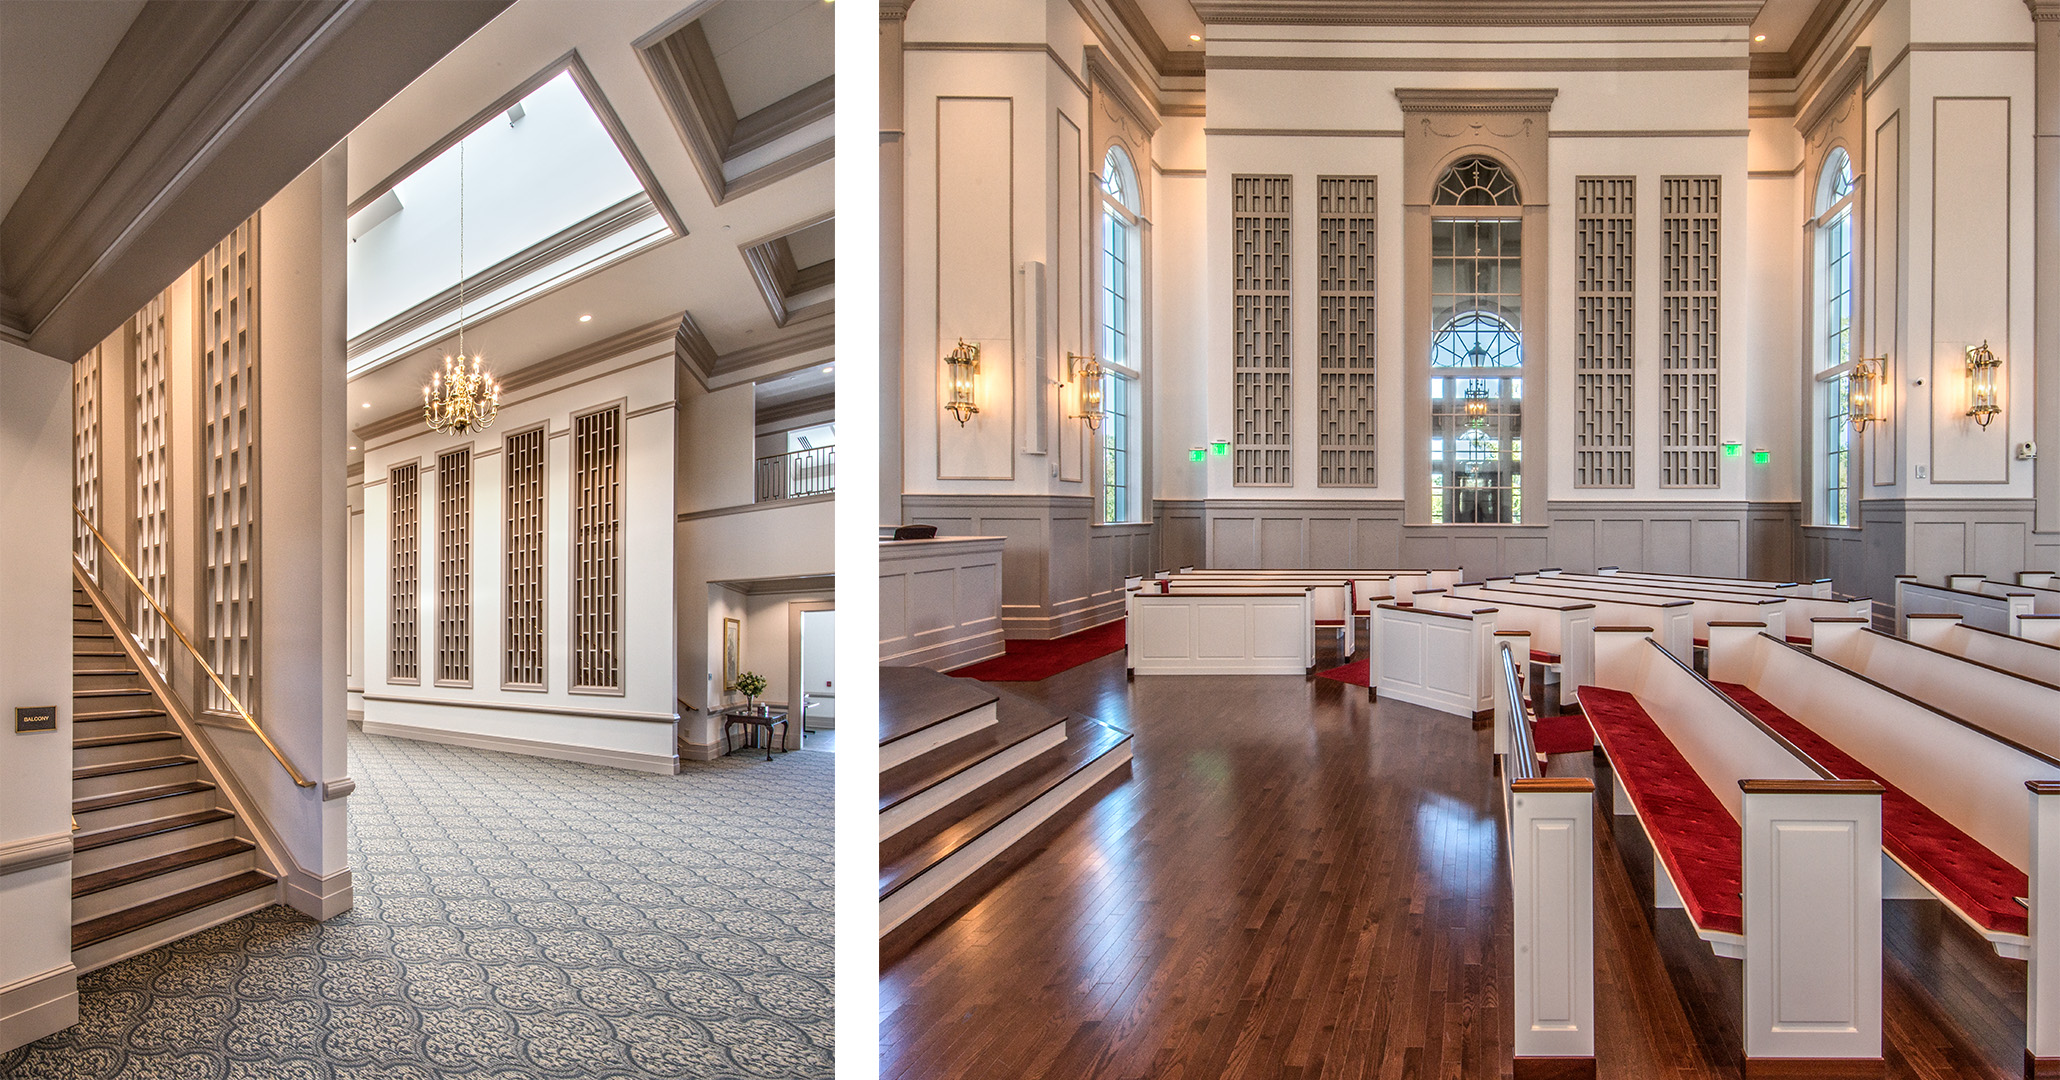 Interiors of the the First Presbyterian Church in Myrtle Beach designed by BOUDREAUX.